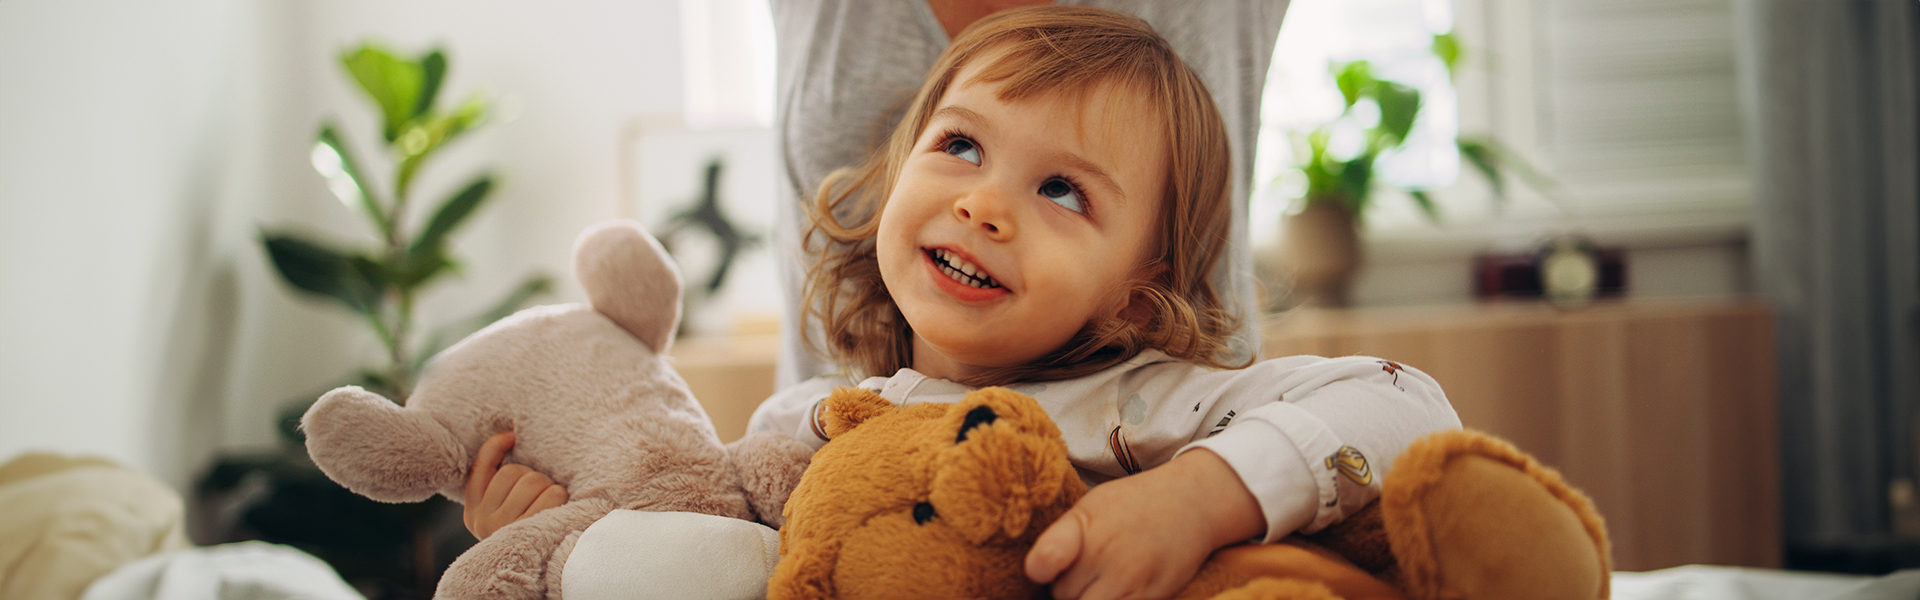 toddler girl holding a couple of teddy bears while smiling